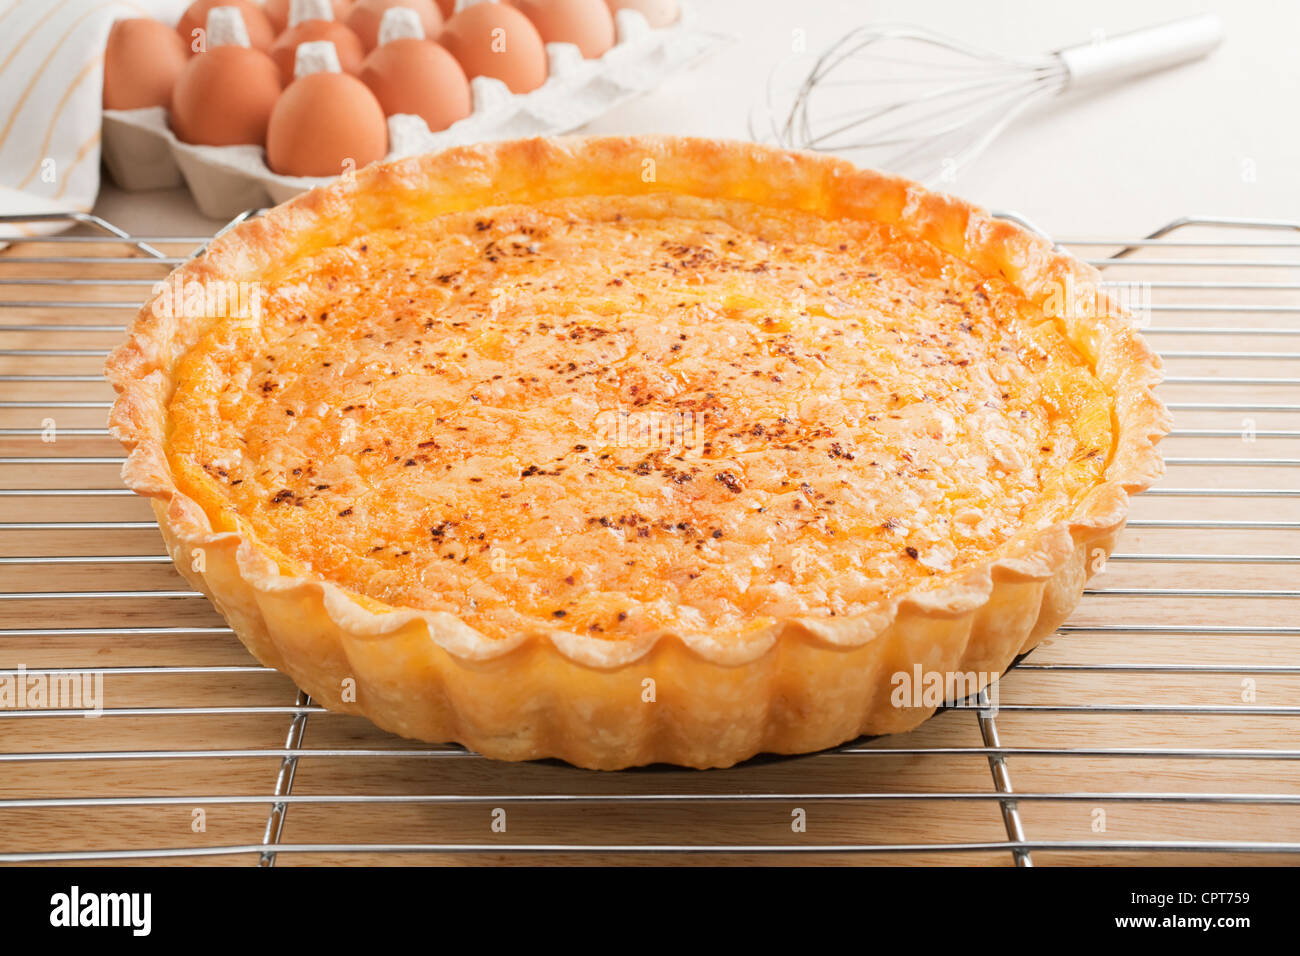 Salmon quiche, fresh from the oven, cooling on a wire rack, eggs and whisk in background. Stock Photo